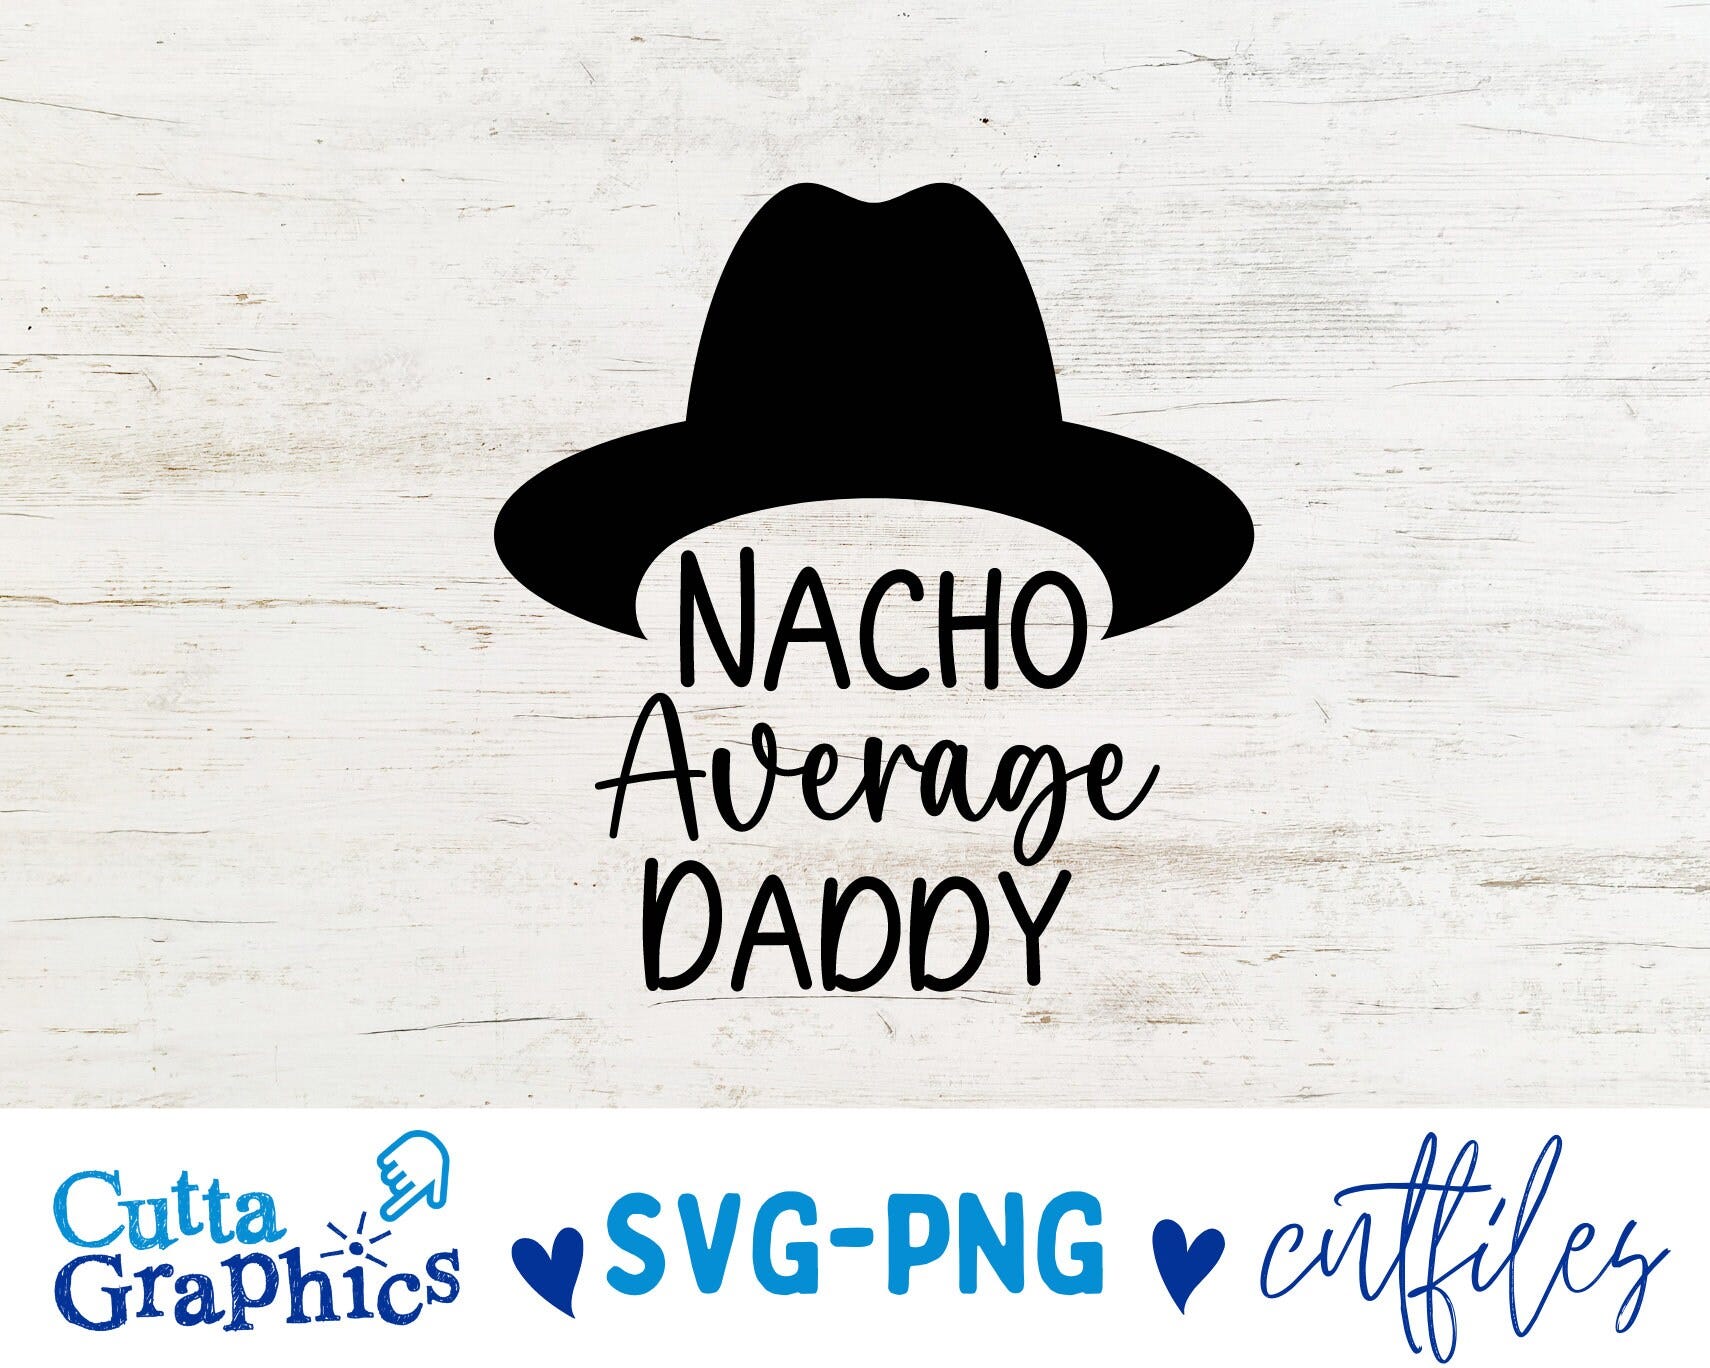 Dad Svg, Nacho Average Dad Svg, Cinco de Mayo Svg, Birthday Party Svg, Dxf, Eps, Png, Daddy Cut Files, Mexican Theme Svg, Silhouette, Cricu